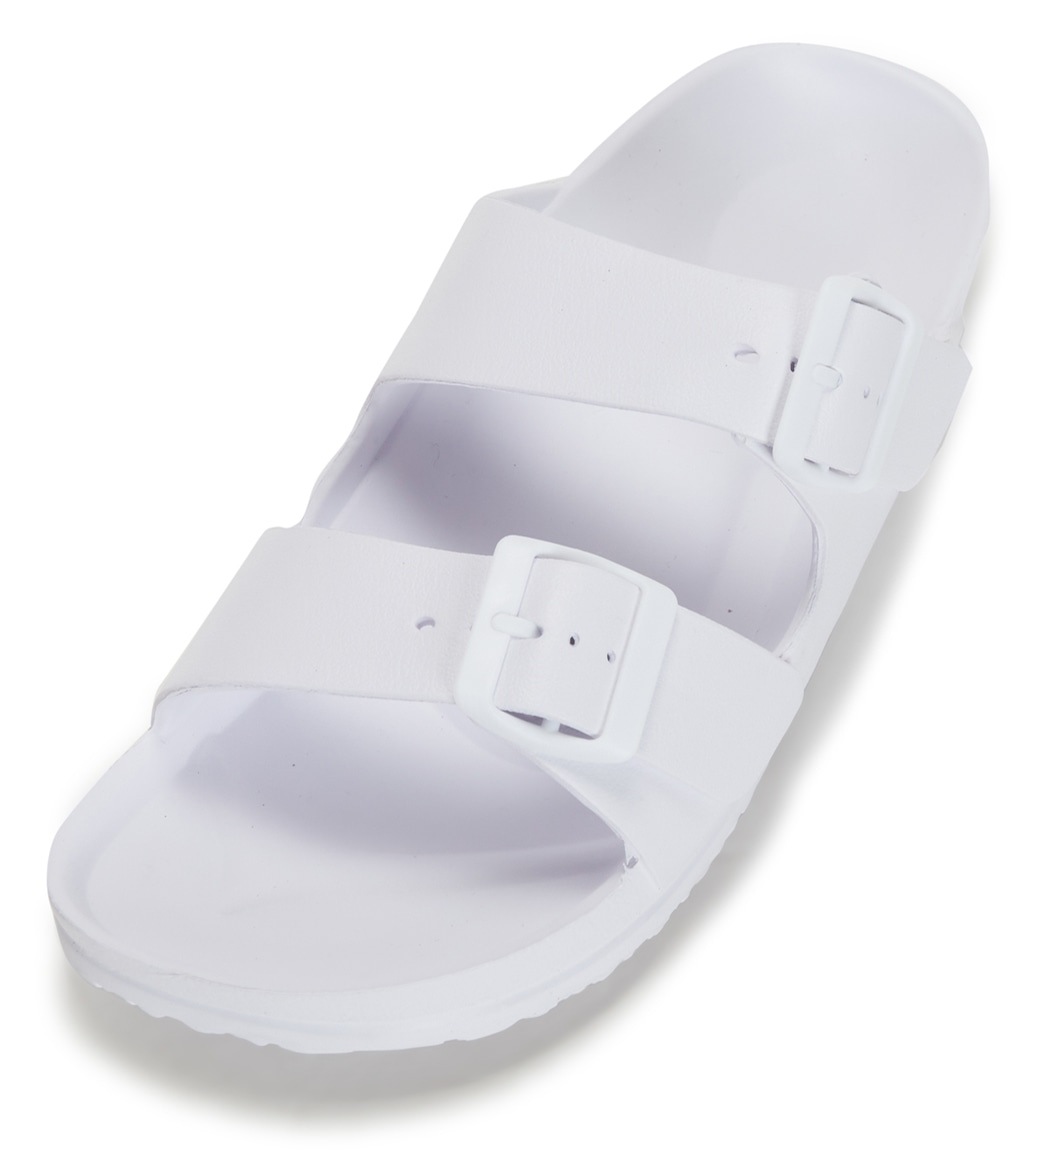 Northside Women's Tate Slip On Shoes Shoes Sandals - White 090 - Swimoutlet.com